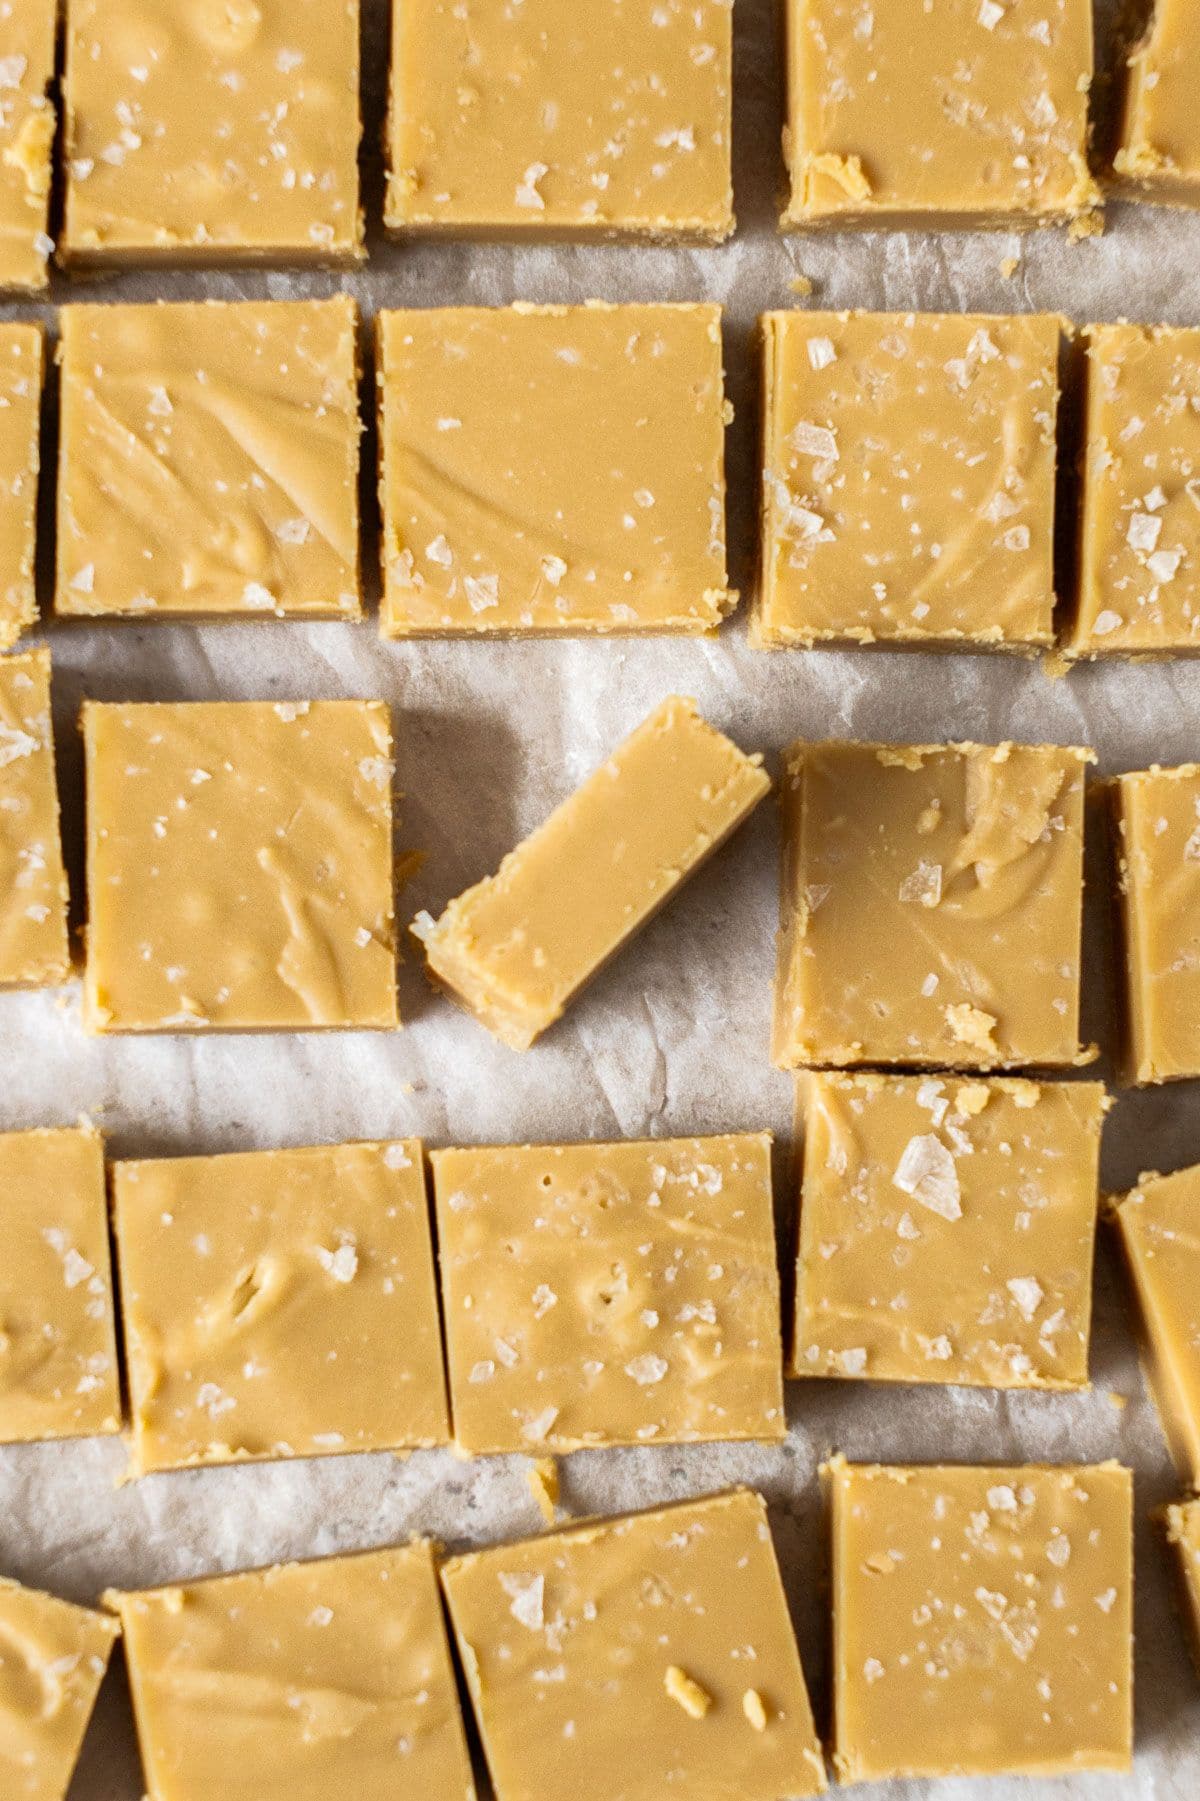 Overhead shot of cut pieces of Caramel Fudge on baking paper, with one piece turned on its side.